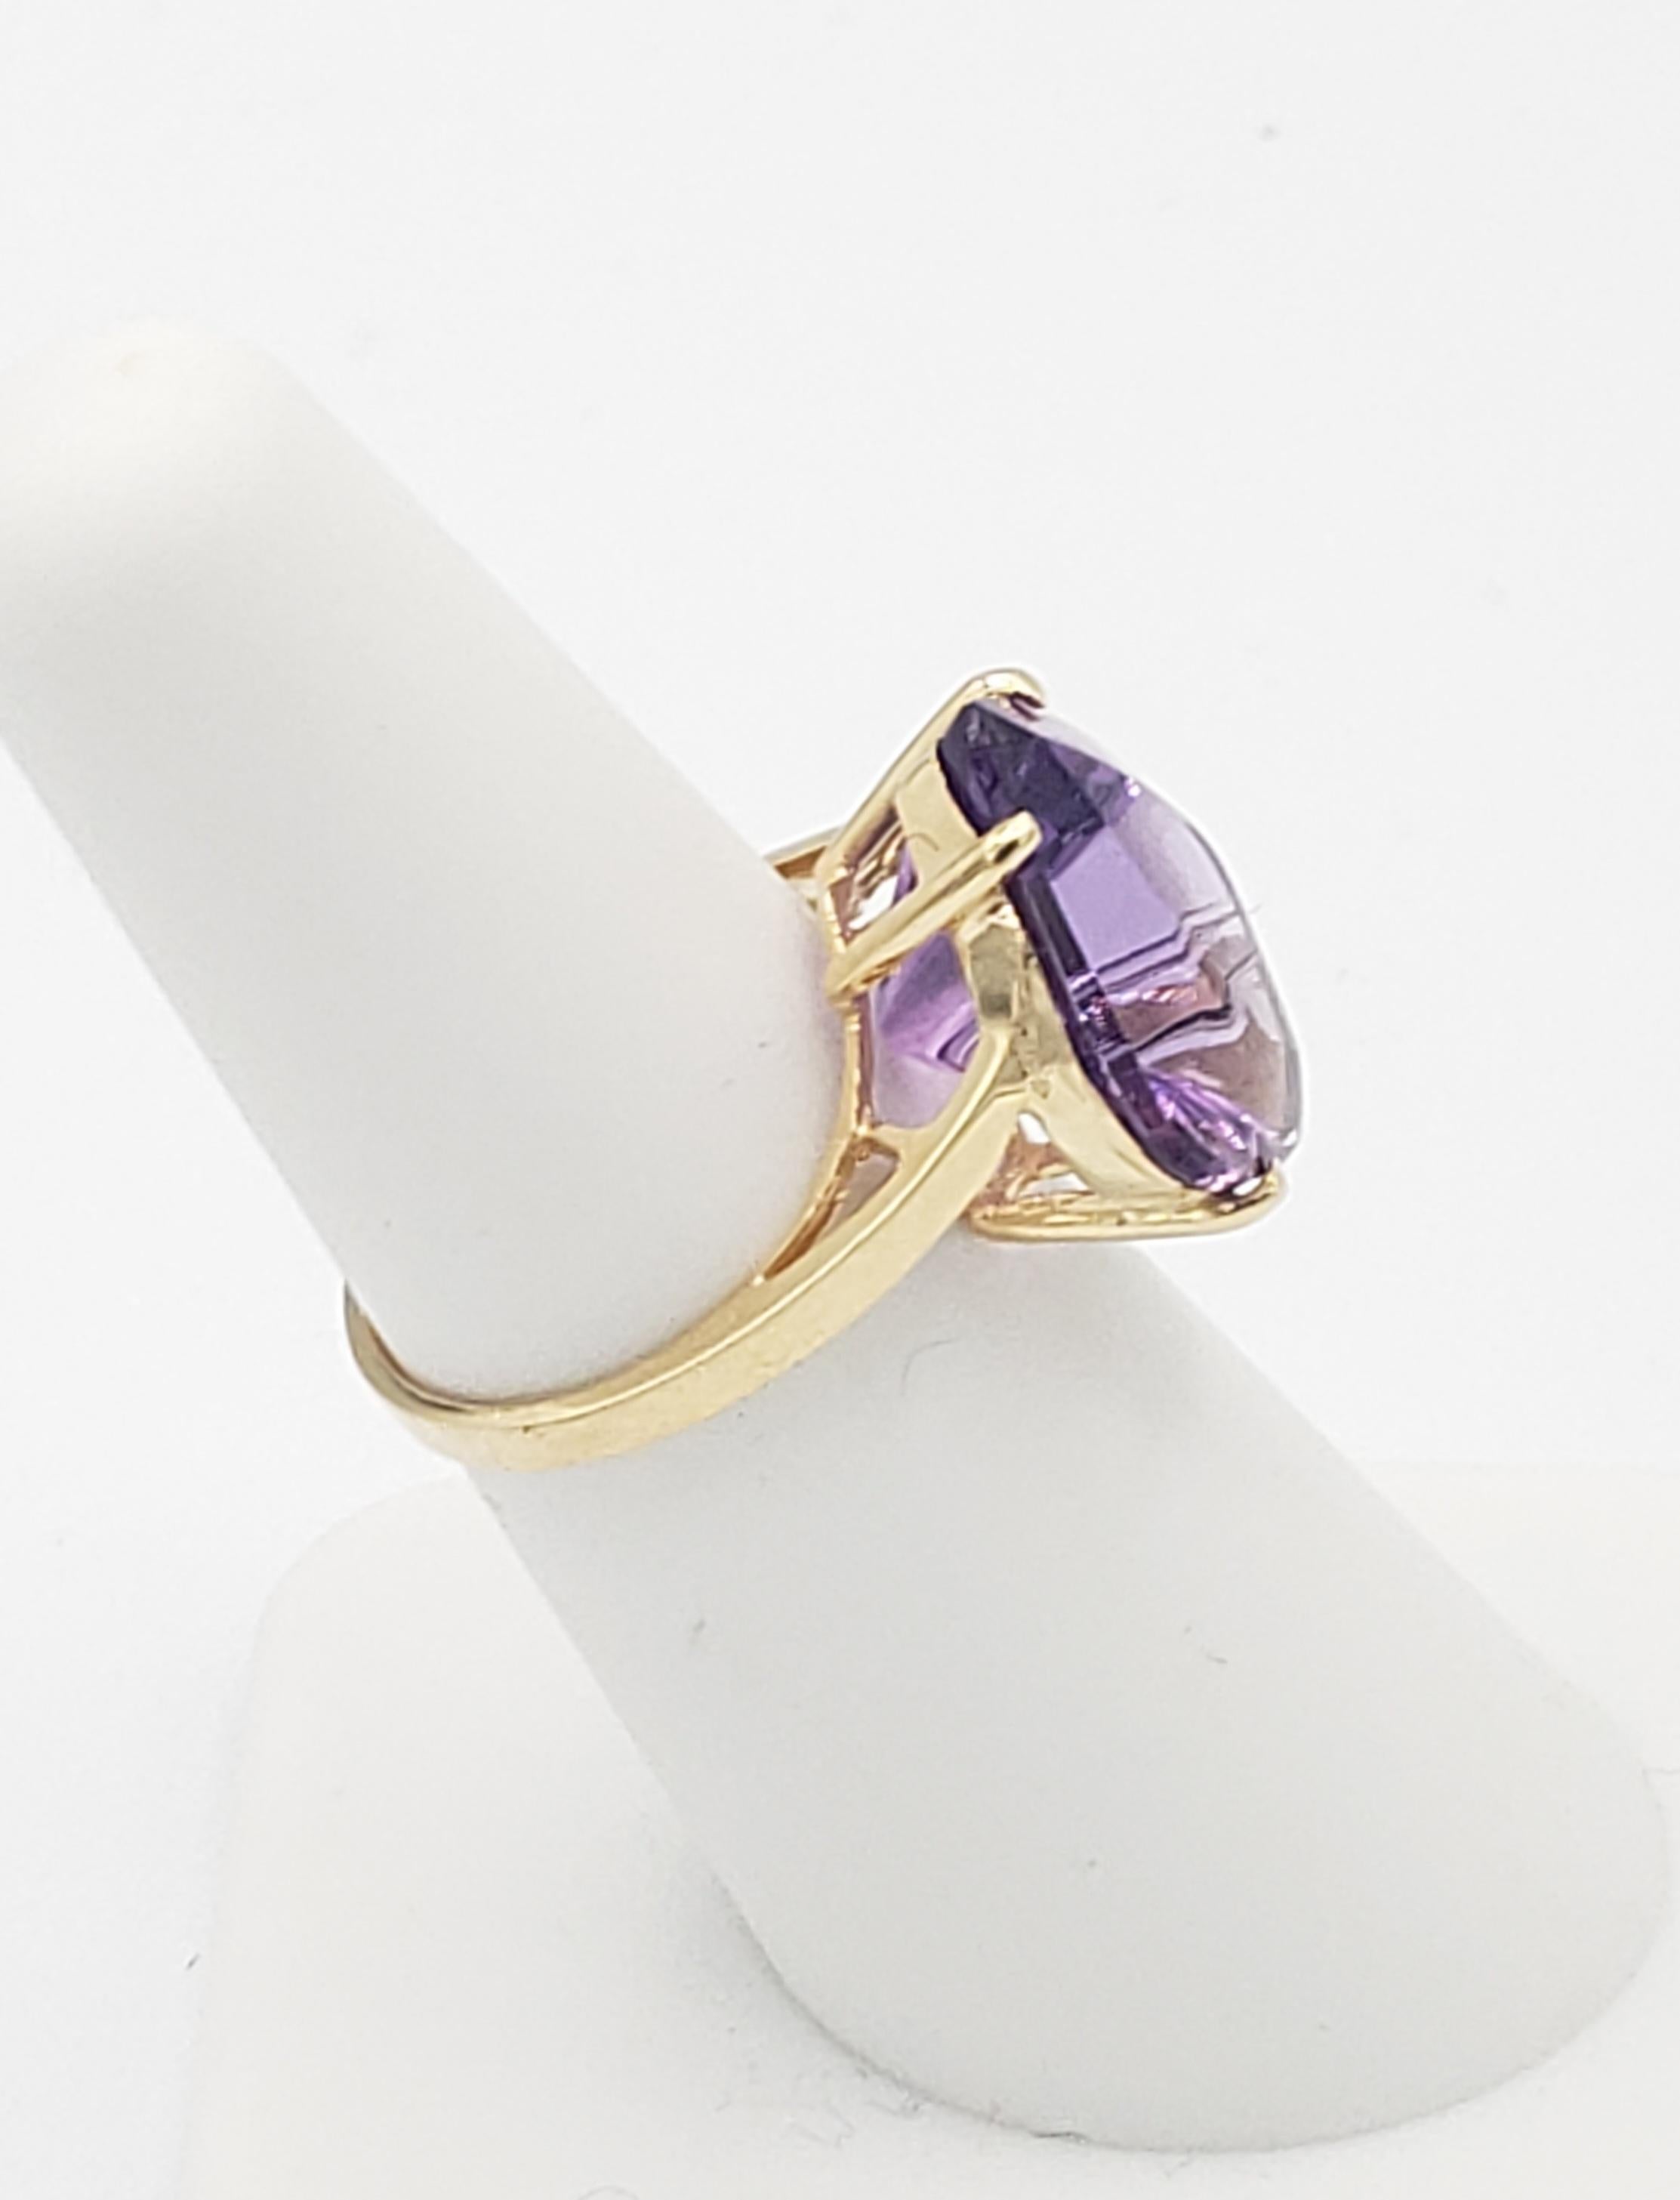 Mixed Cut NEW 8 Ct. Natural  Brazilian Amethyst Fantasy Cut Ring in 14k Yellow Gold New For Sale